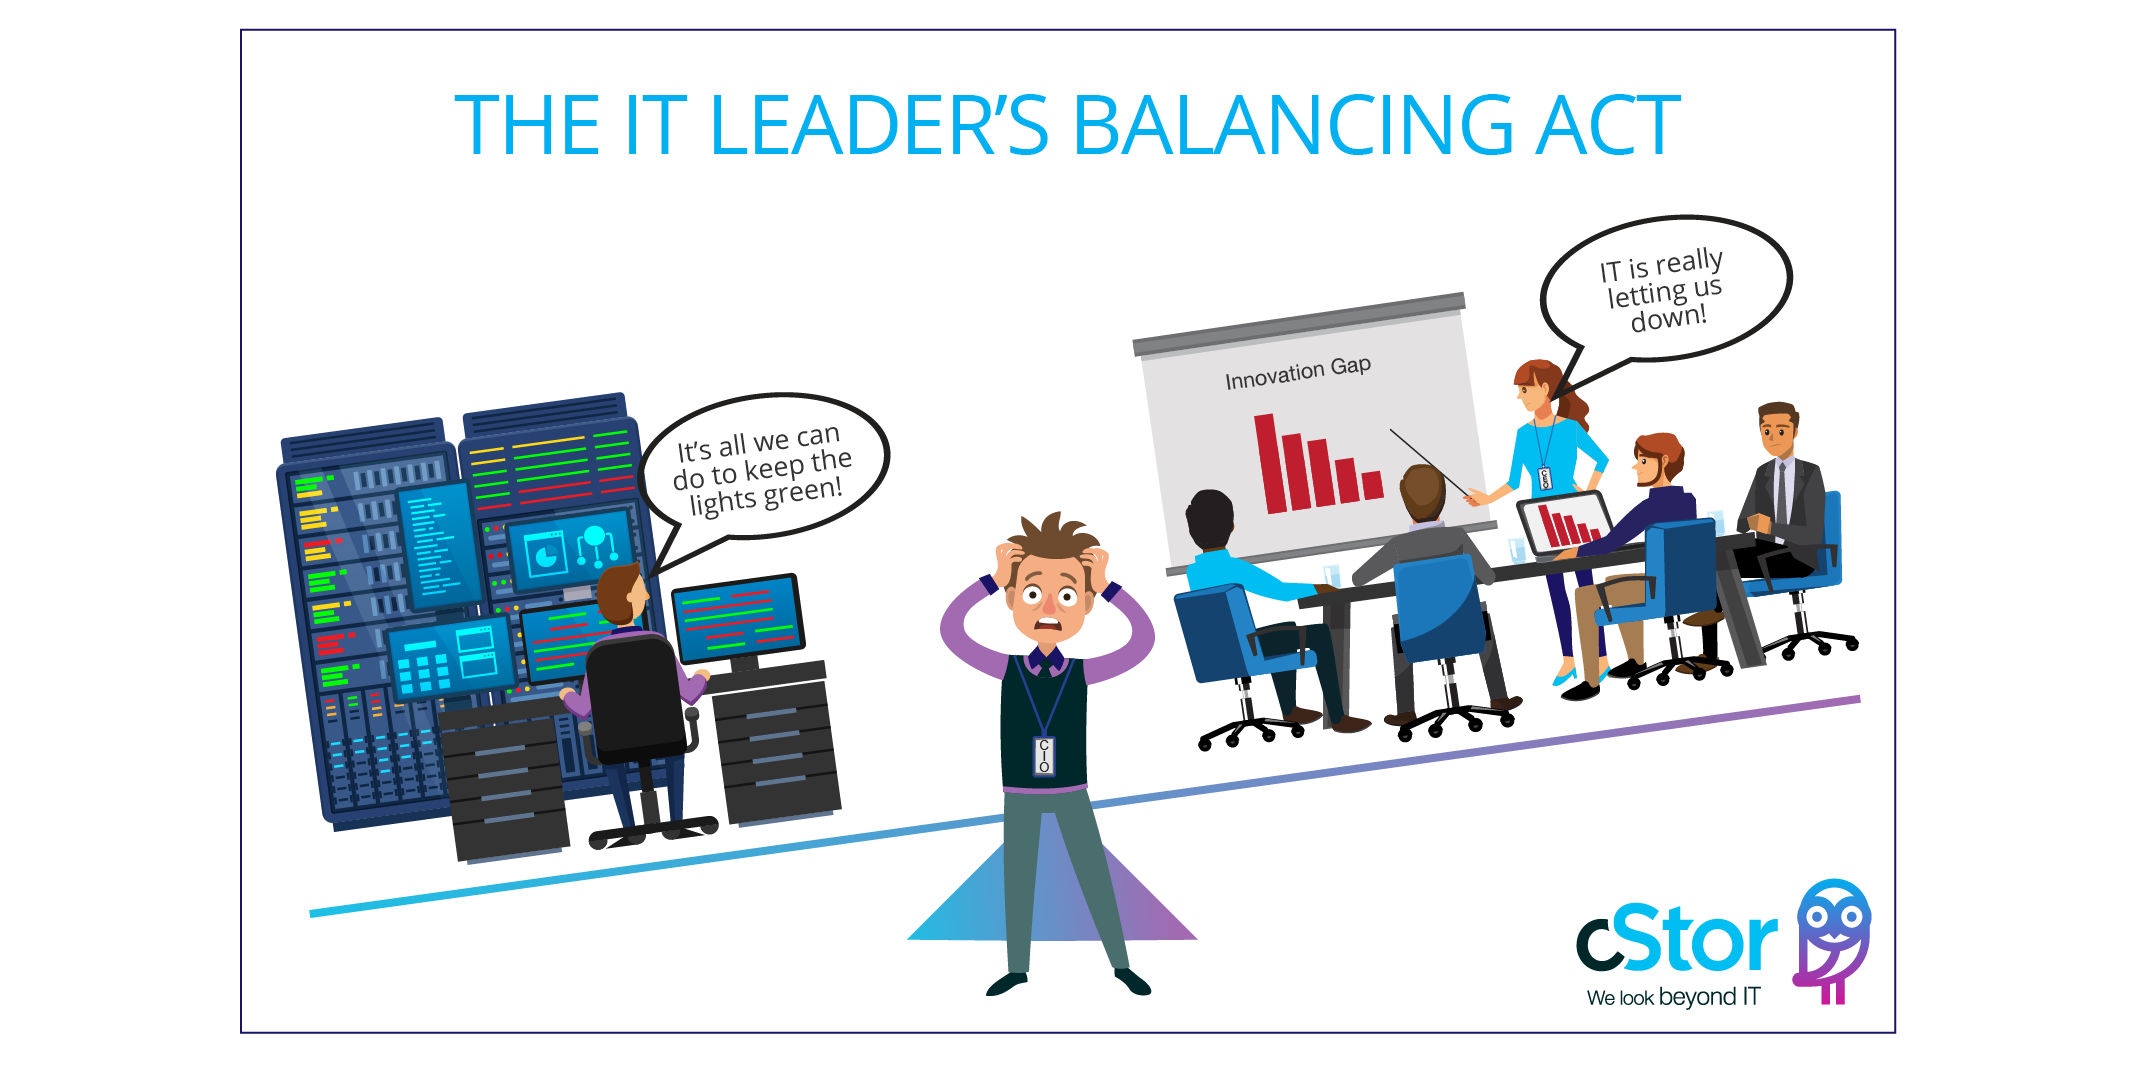 The IT Leader's Balancing Act